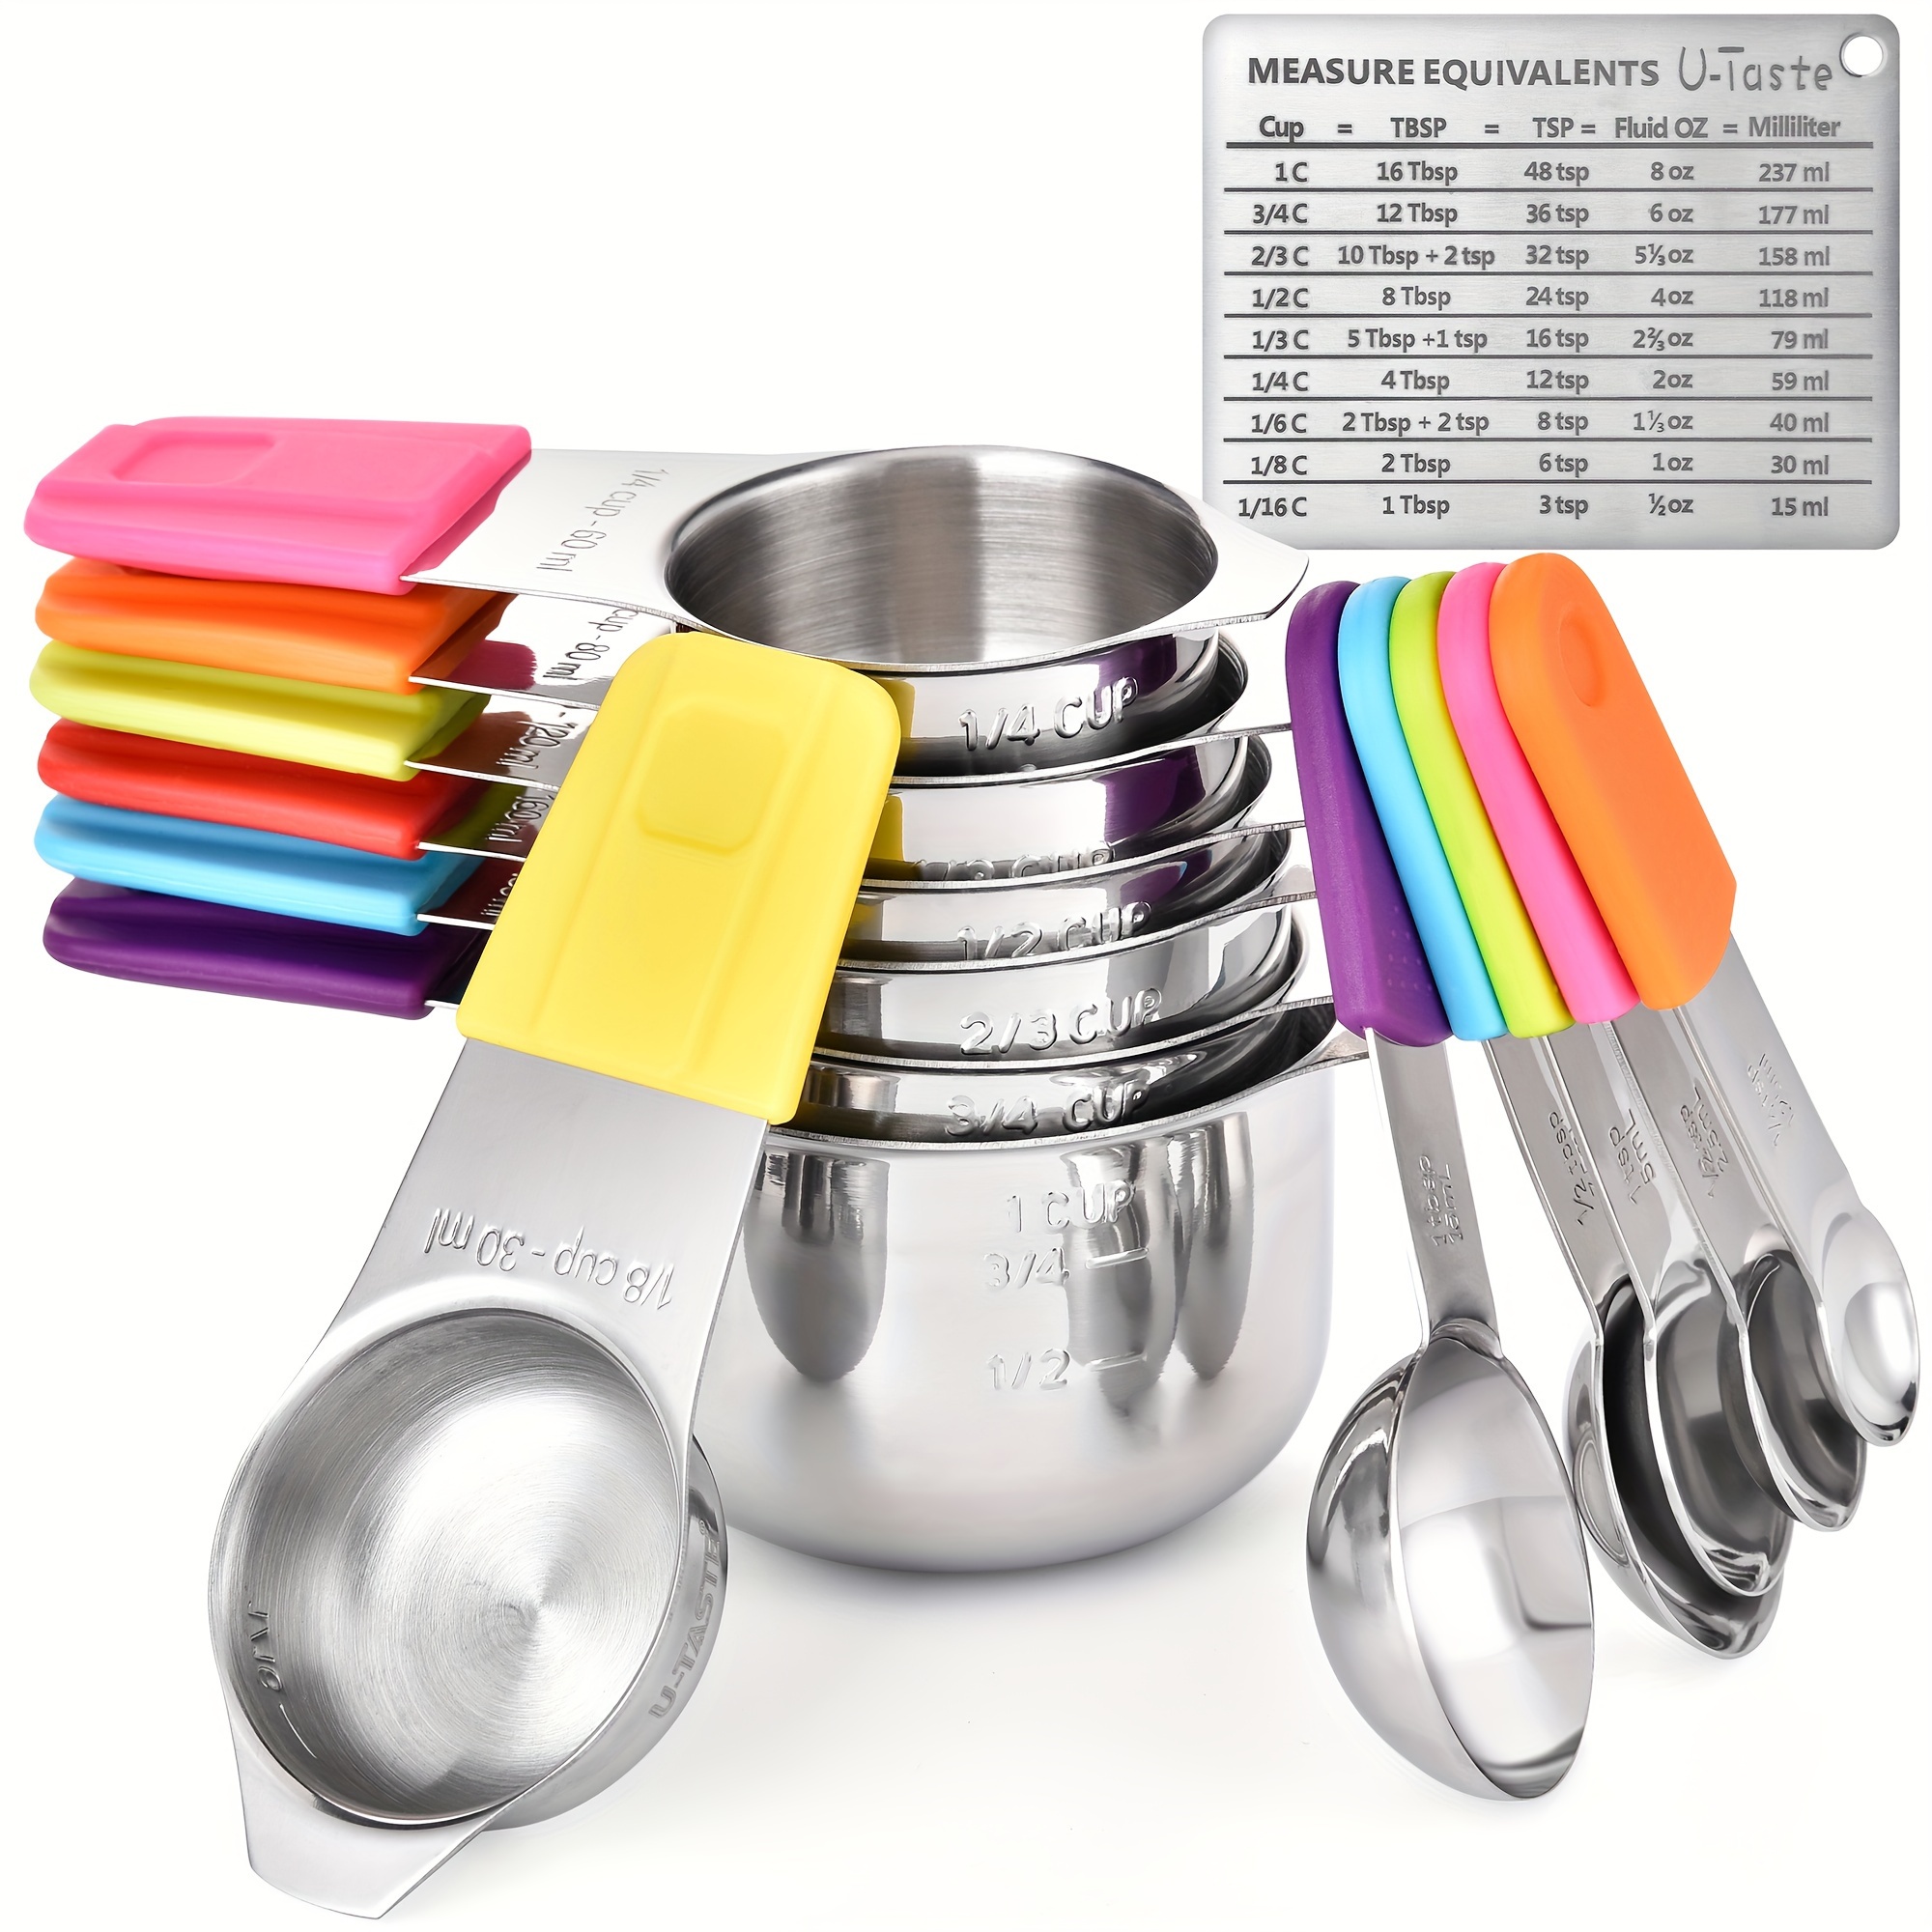 

13pcs/set, Magnetic Measuring Cups And Spoons Set, 18/8 Stainless Steel Measuring Cups And Measuring Spoons With 1 Professional Magnetic Measurement Conversion Chart, Baking Tools